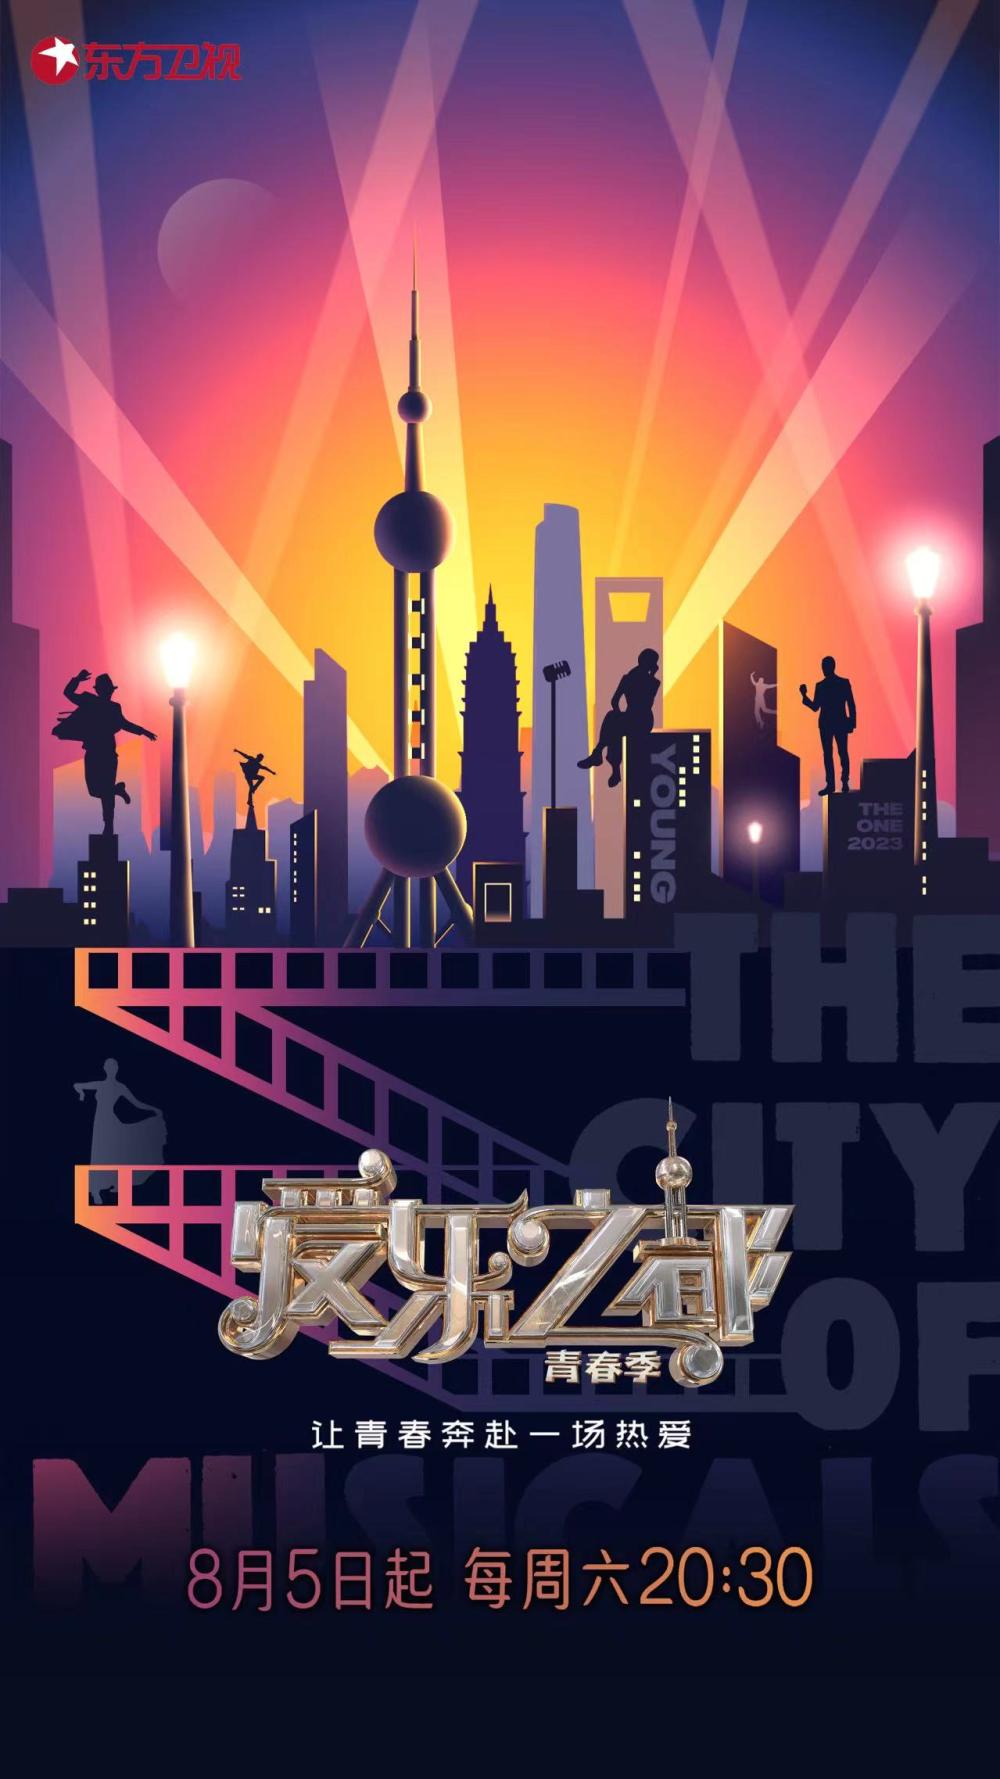 "Love City Youth Season" will be broadcasted on August 5th, focusing on the culture of Chinese musical "New Voice Power" | Musical | Love City Youth Season